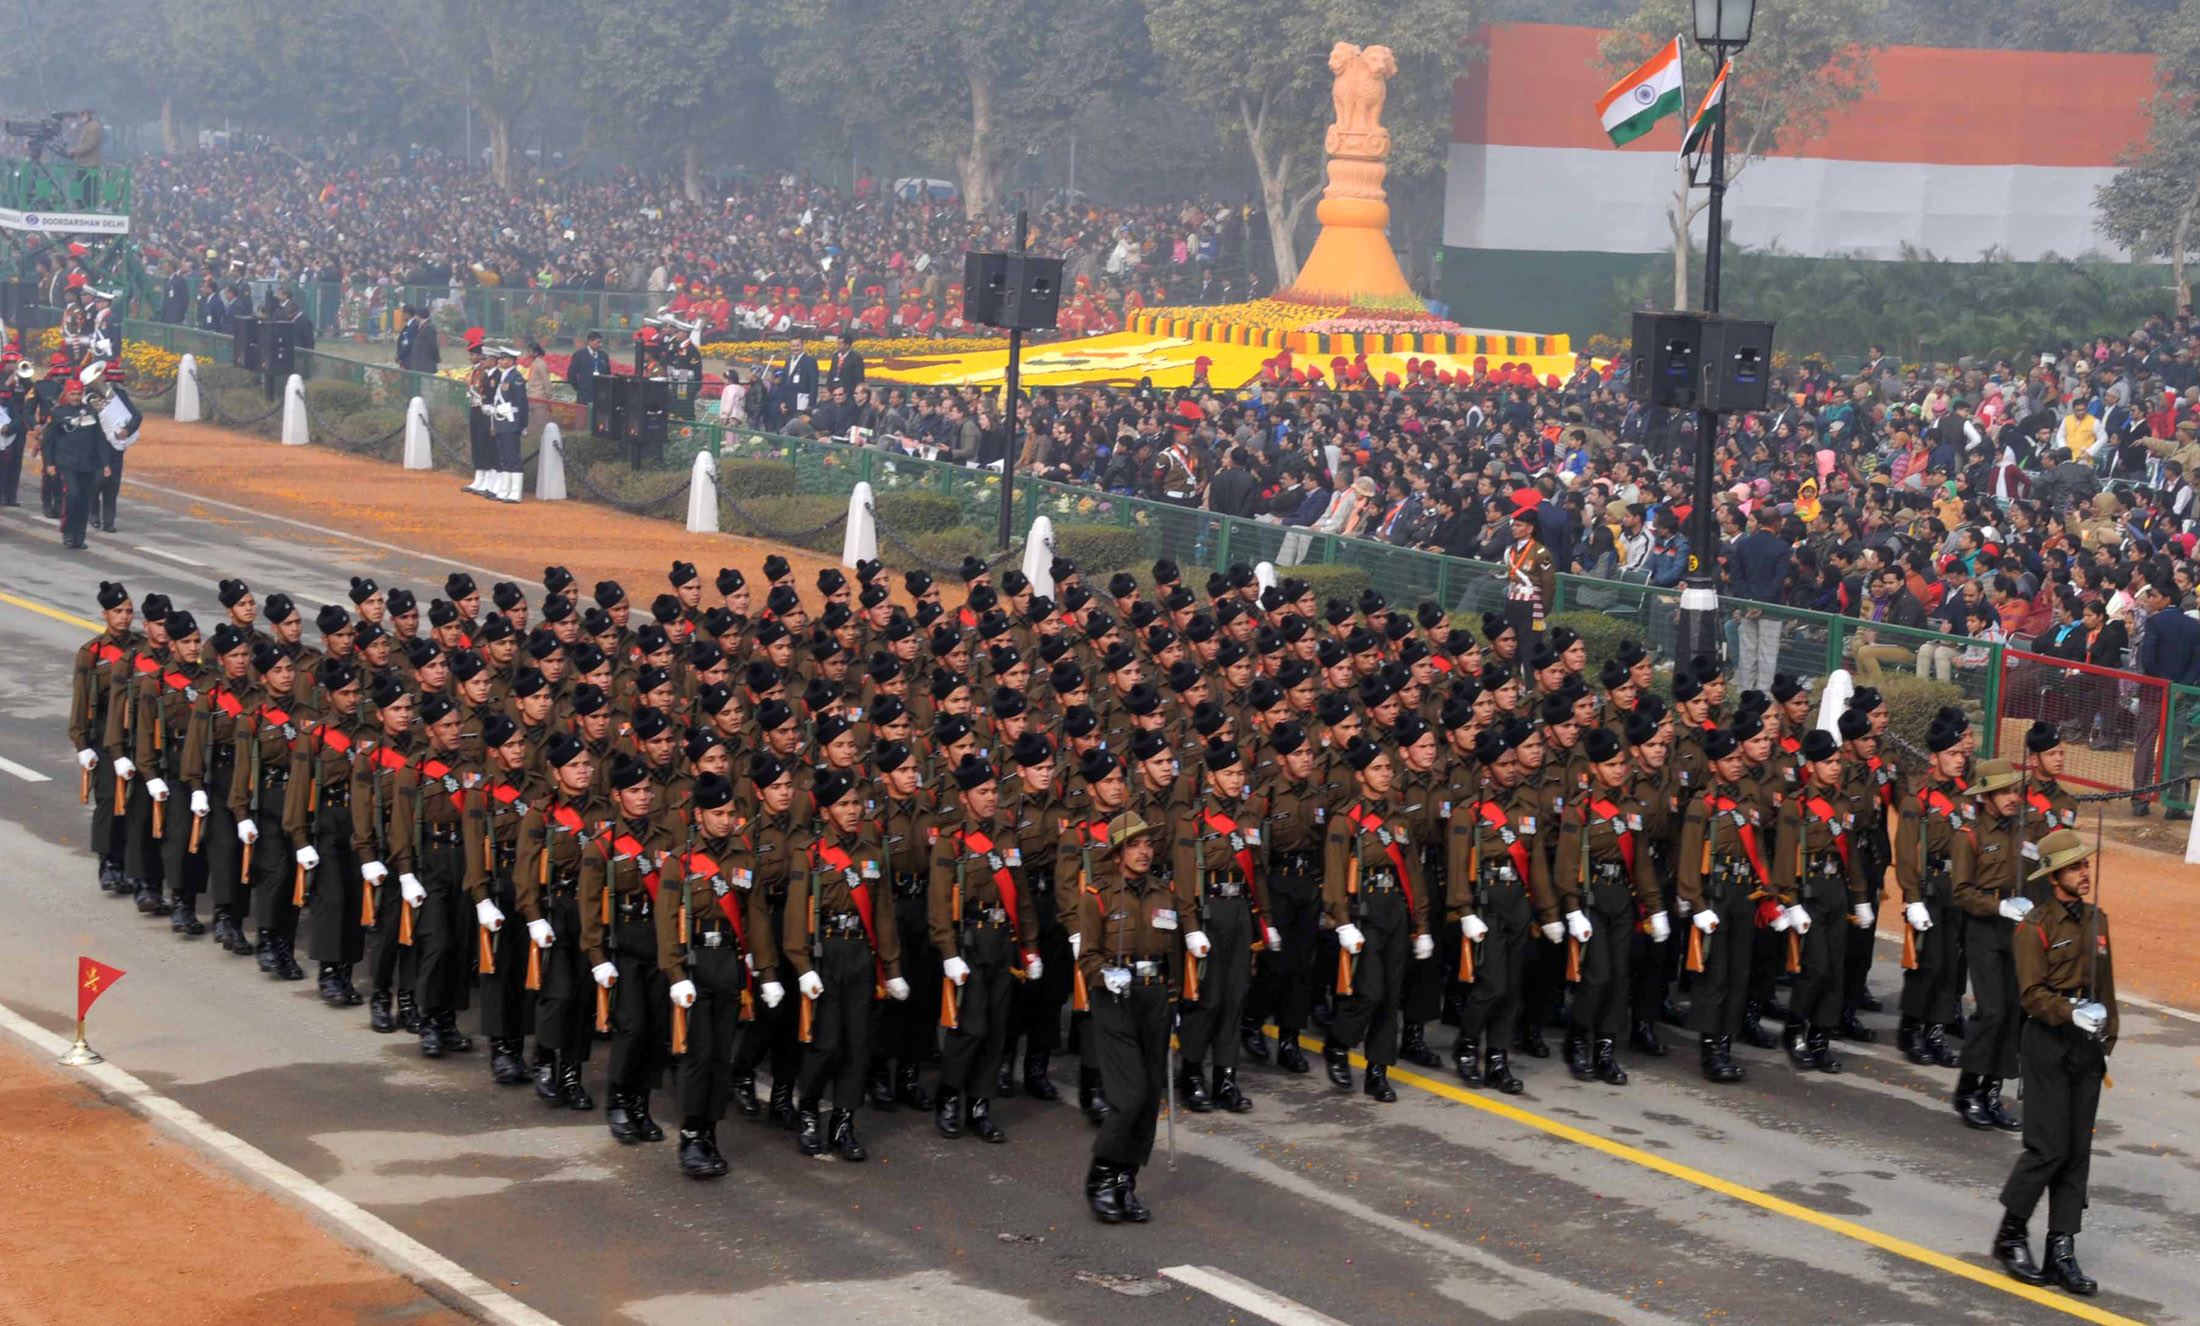 The_Garhwal_Rifles_marching_contingents_passes_through_the_Rajpath,_on_the_occasion_of_the_67th_Republic_Day_Parade_2016,_in_New_Delhi_on_January_26,_2016